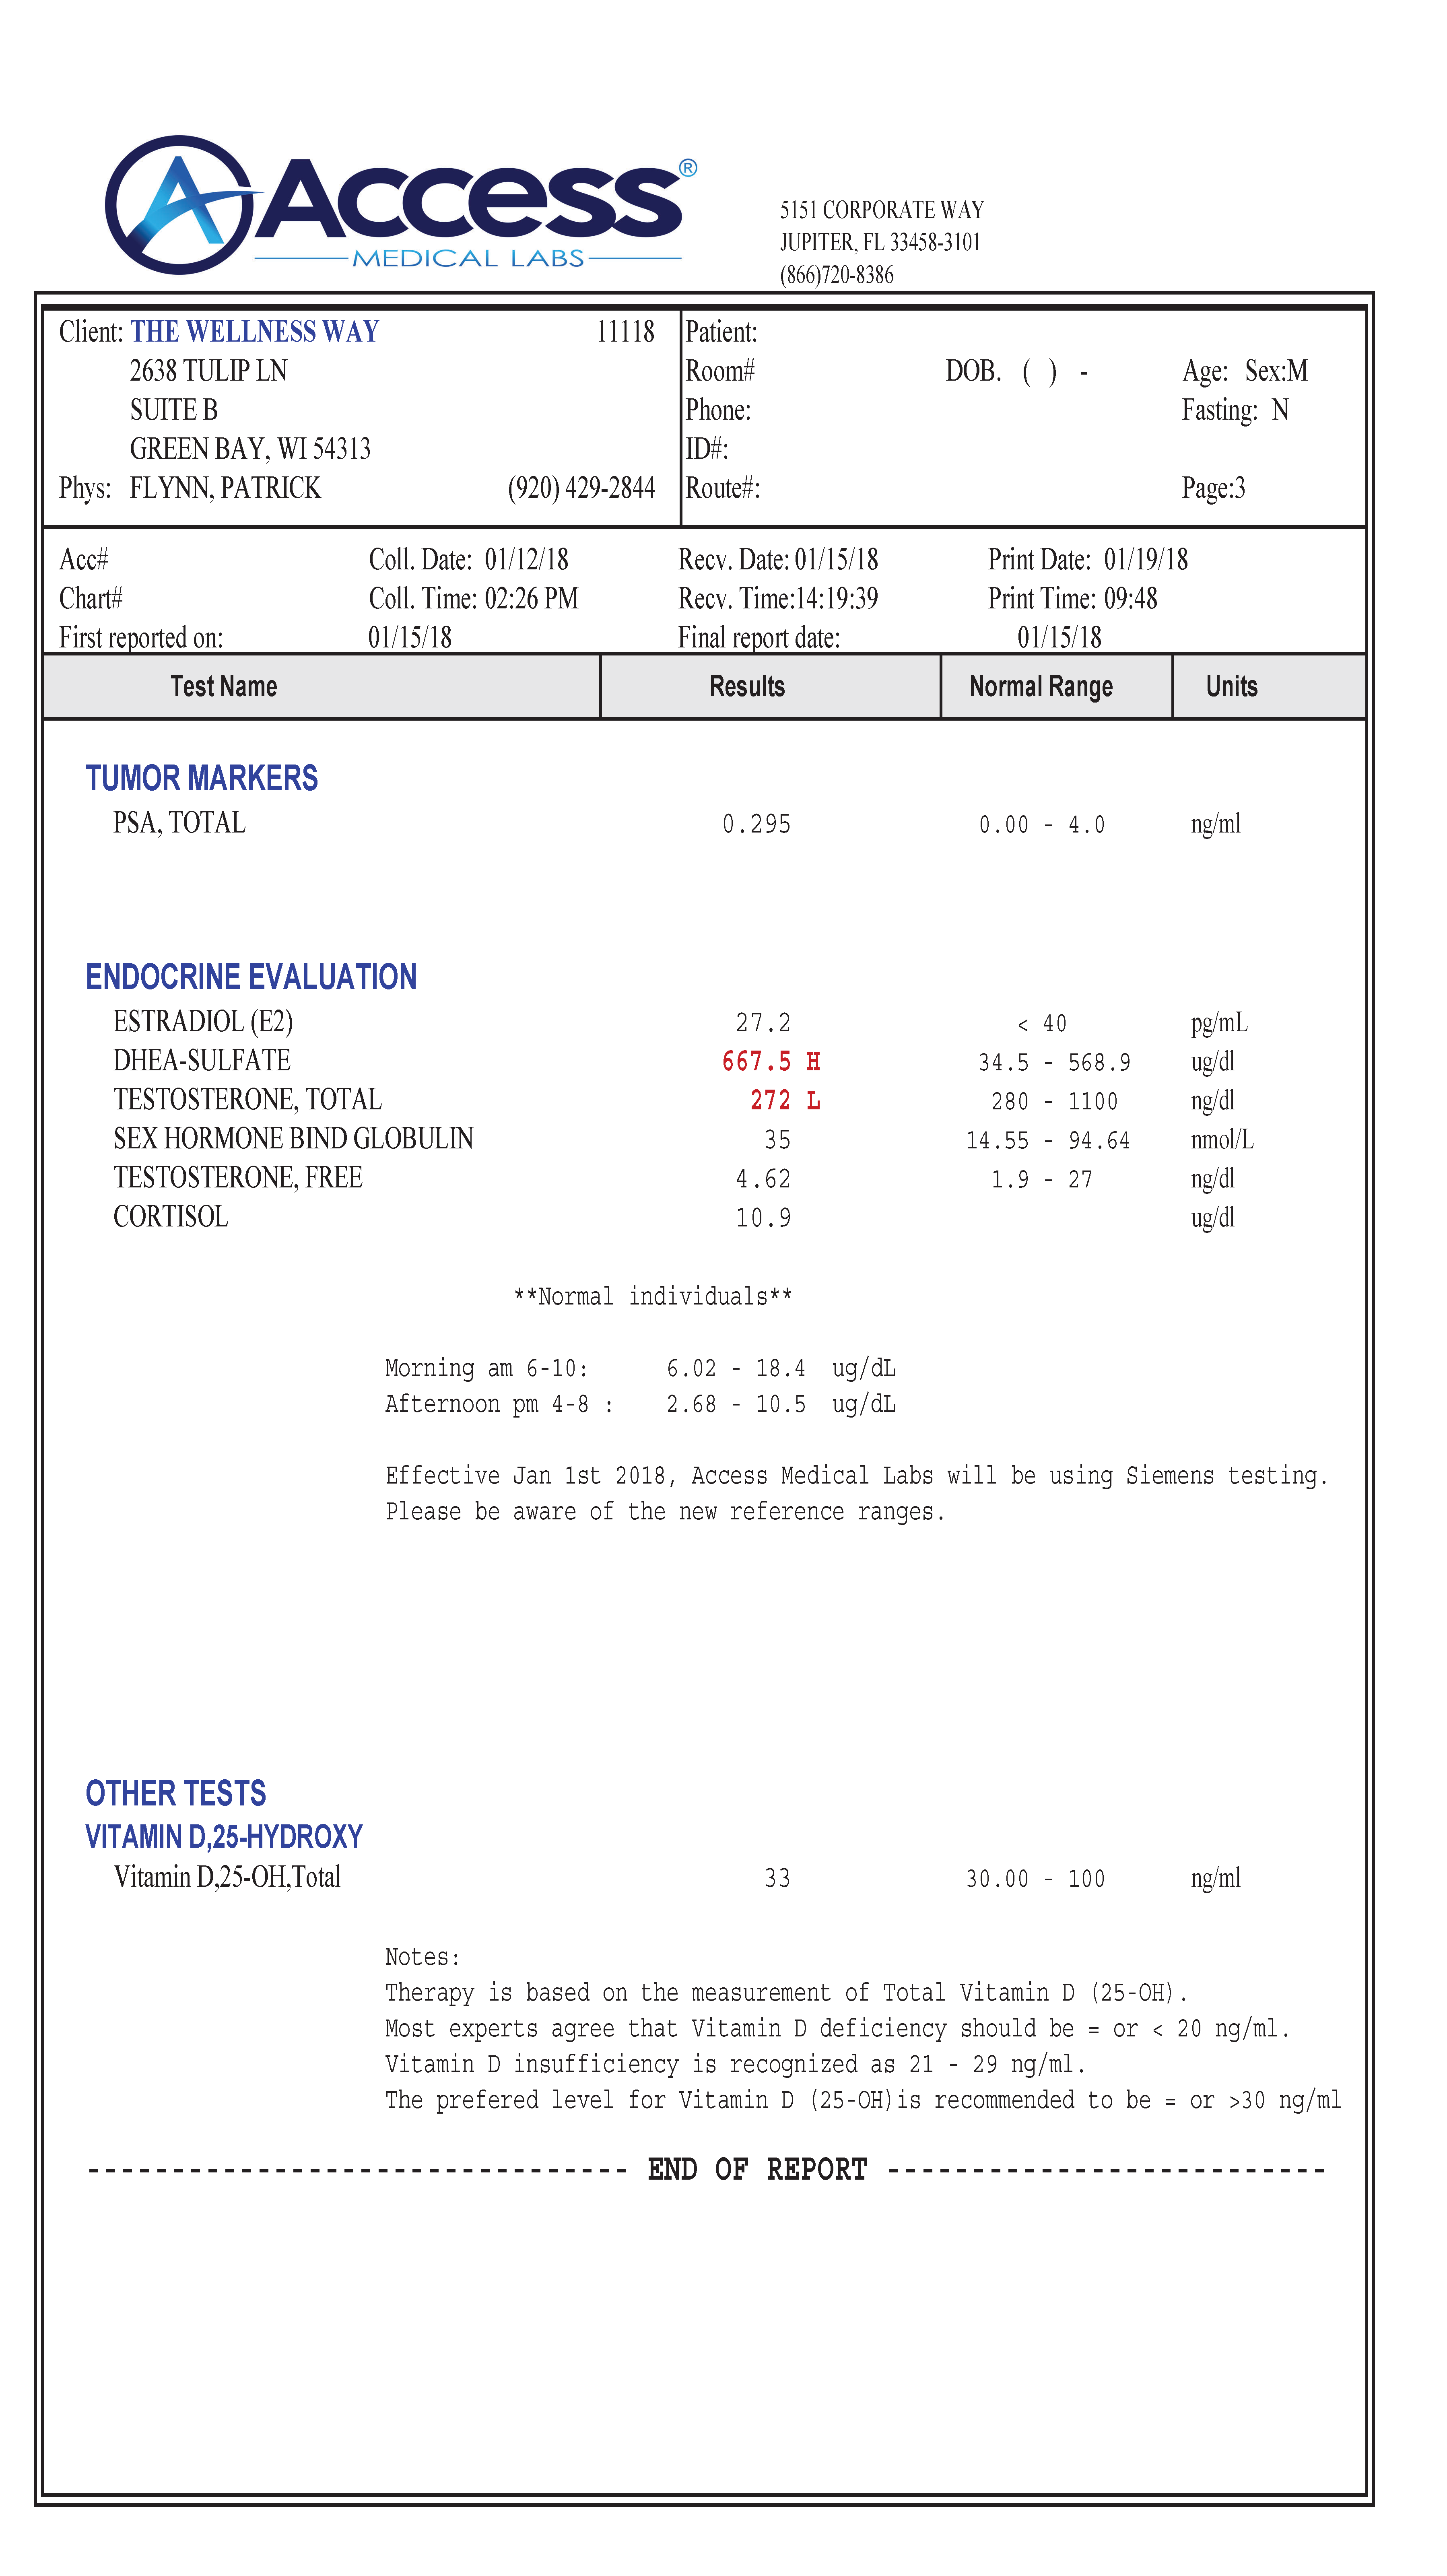 Lab results showing high testosterone